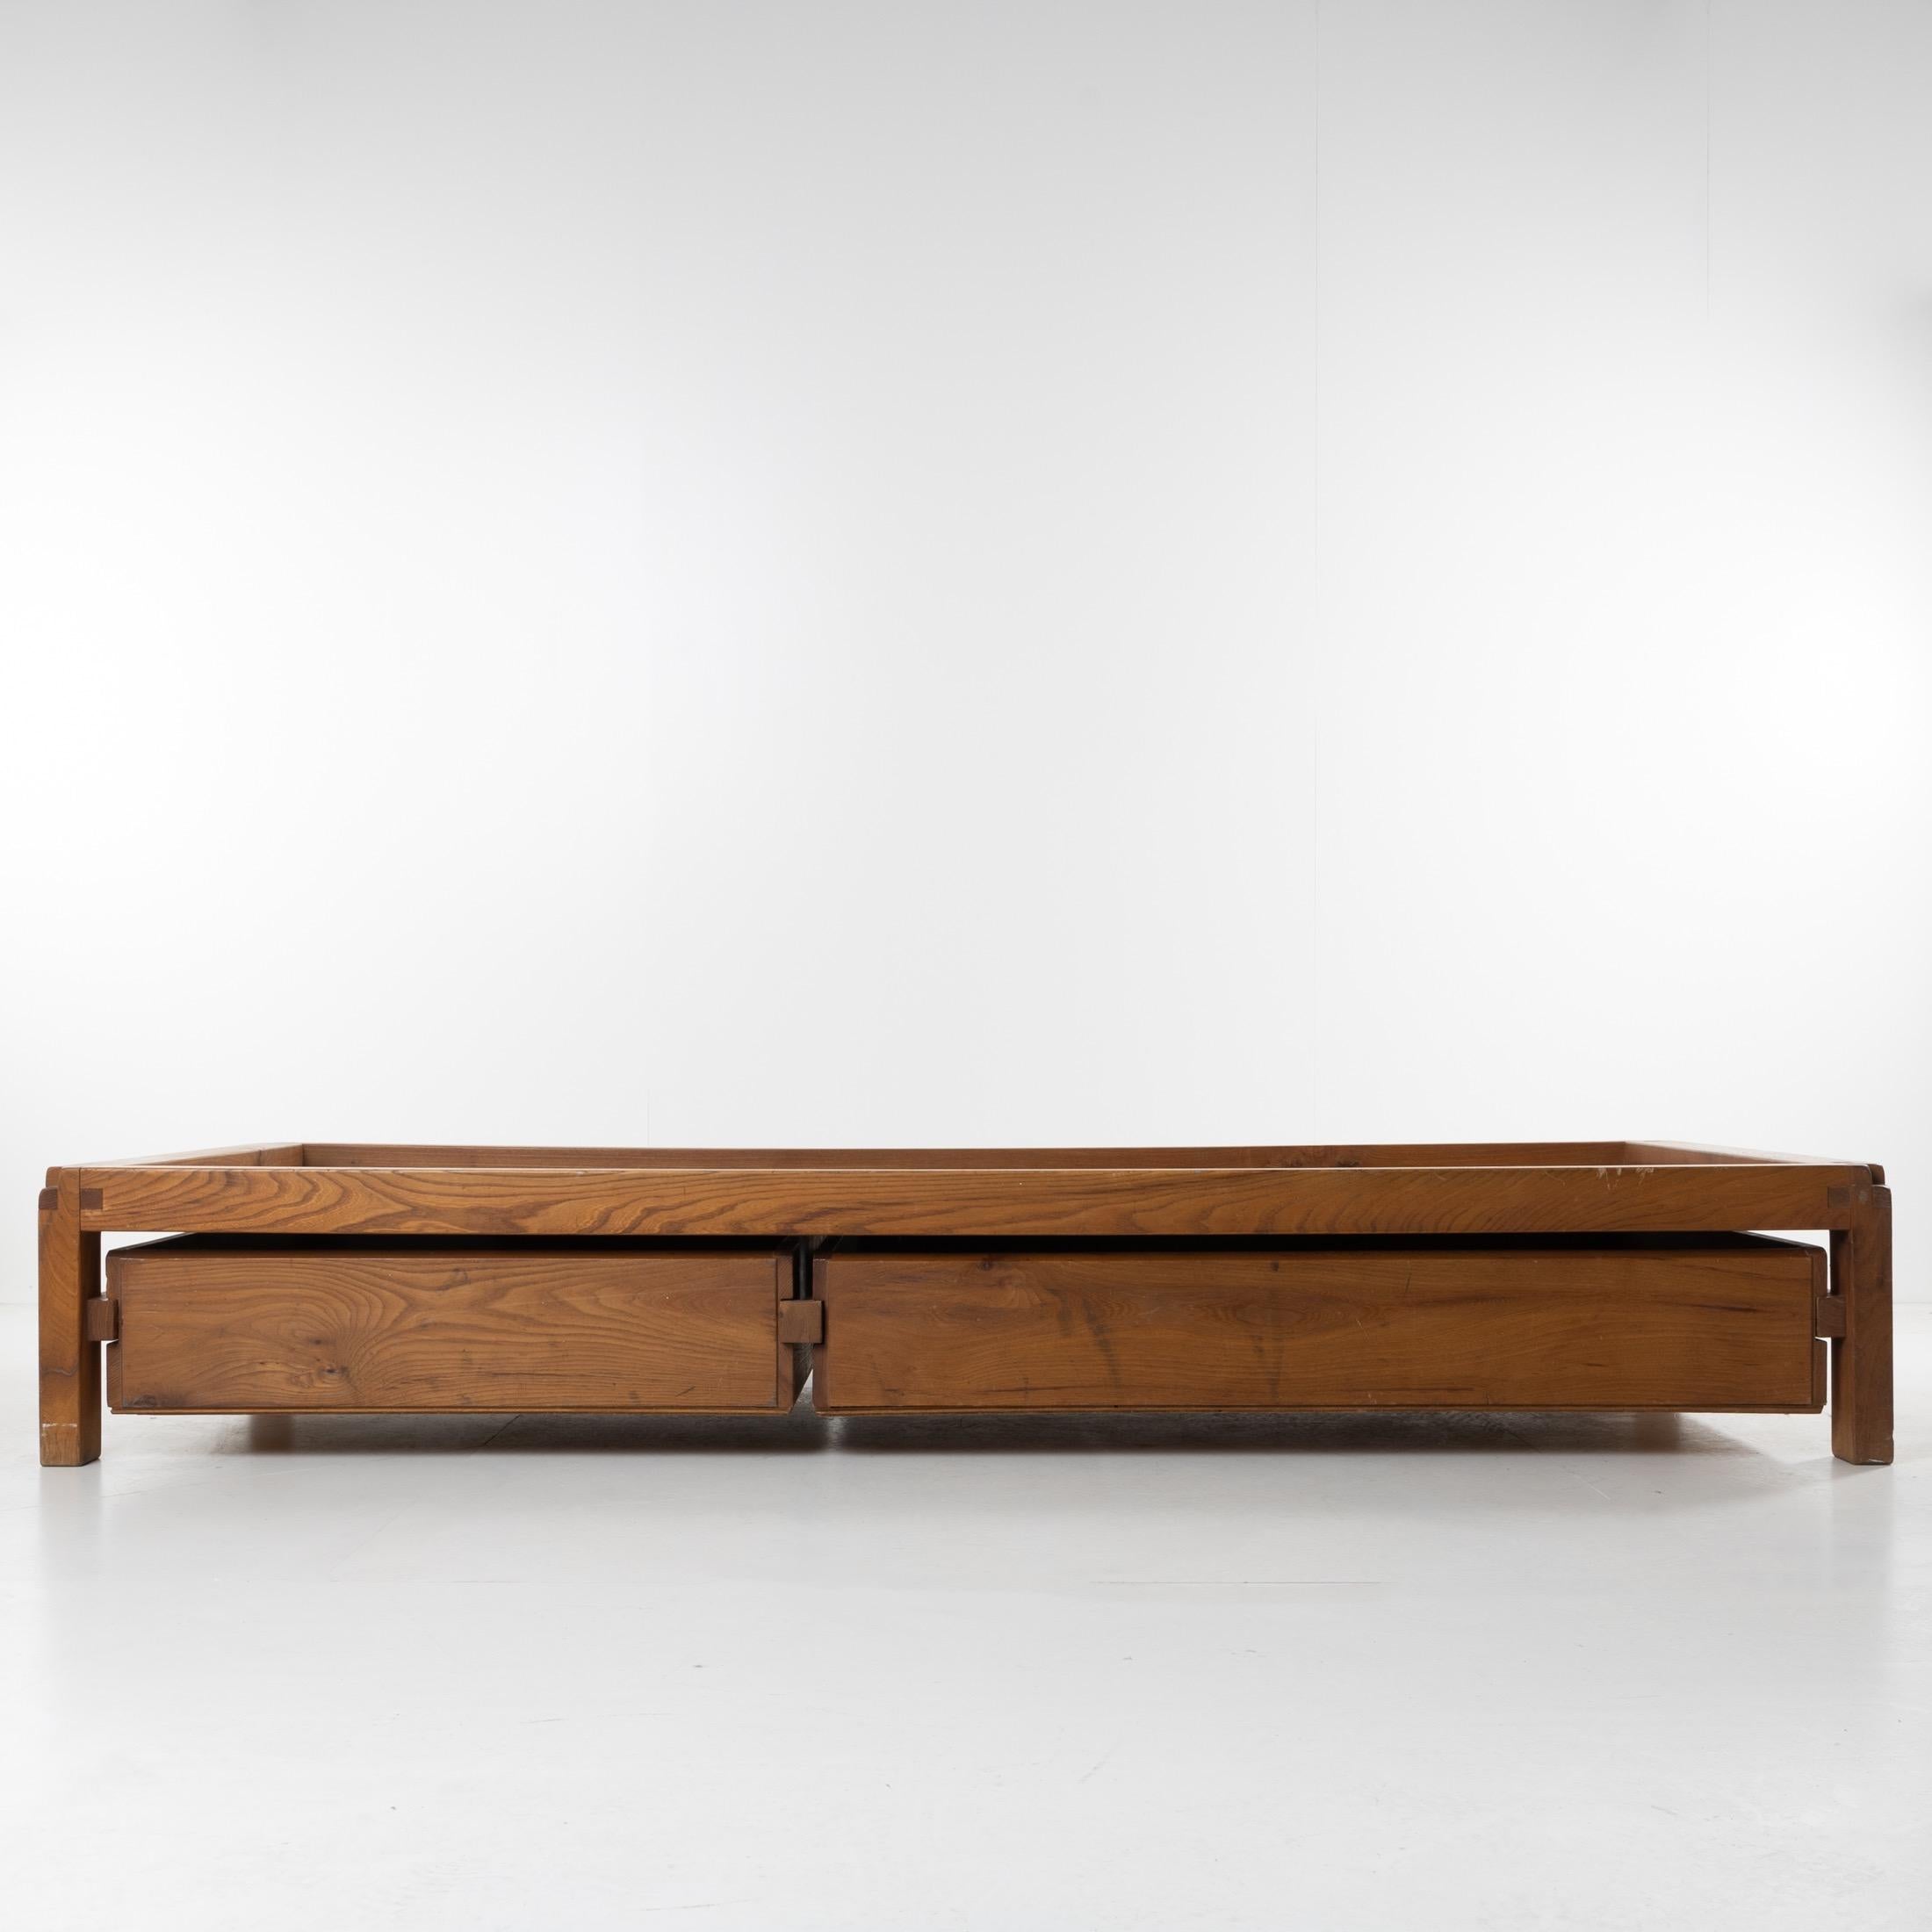 About this daybed by Pierre Chapo
Daybed type 